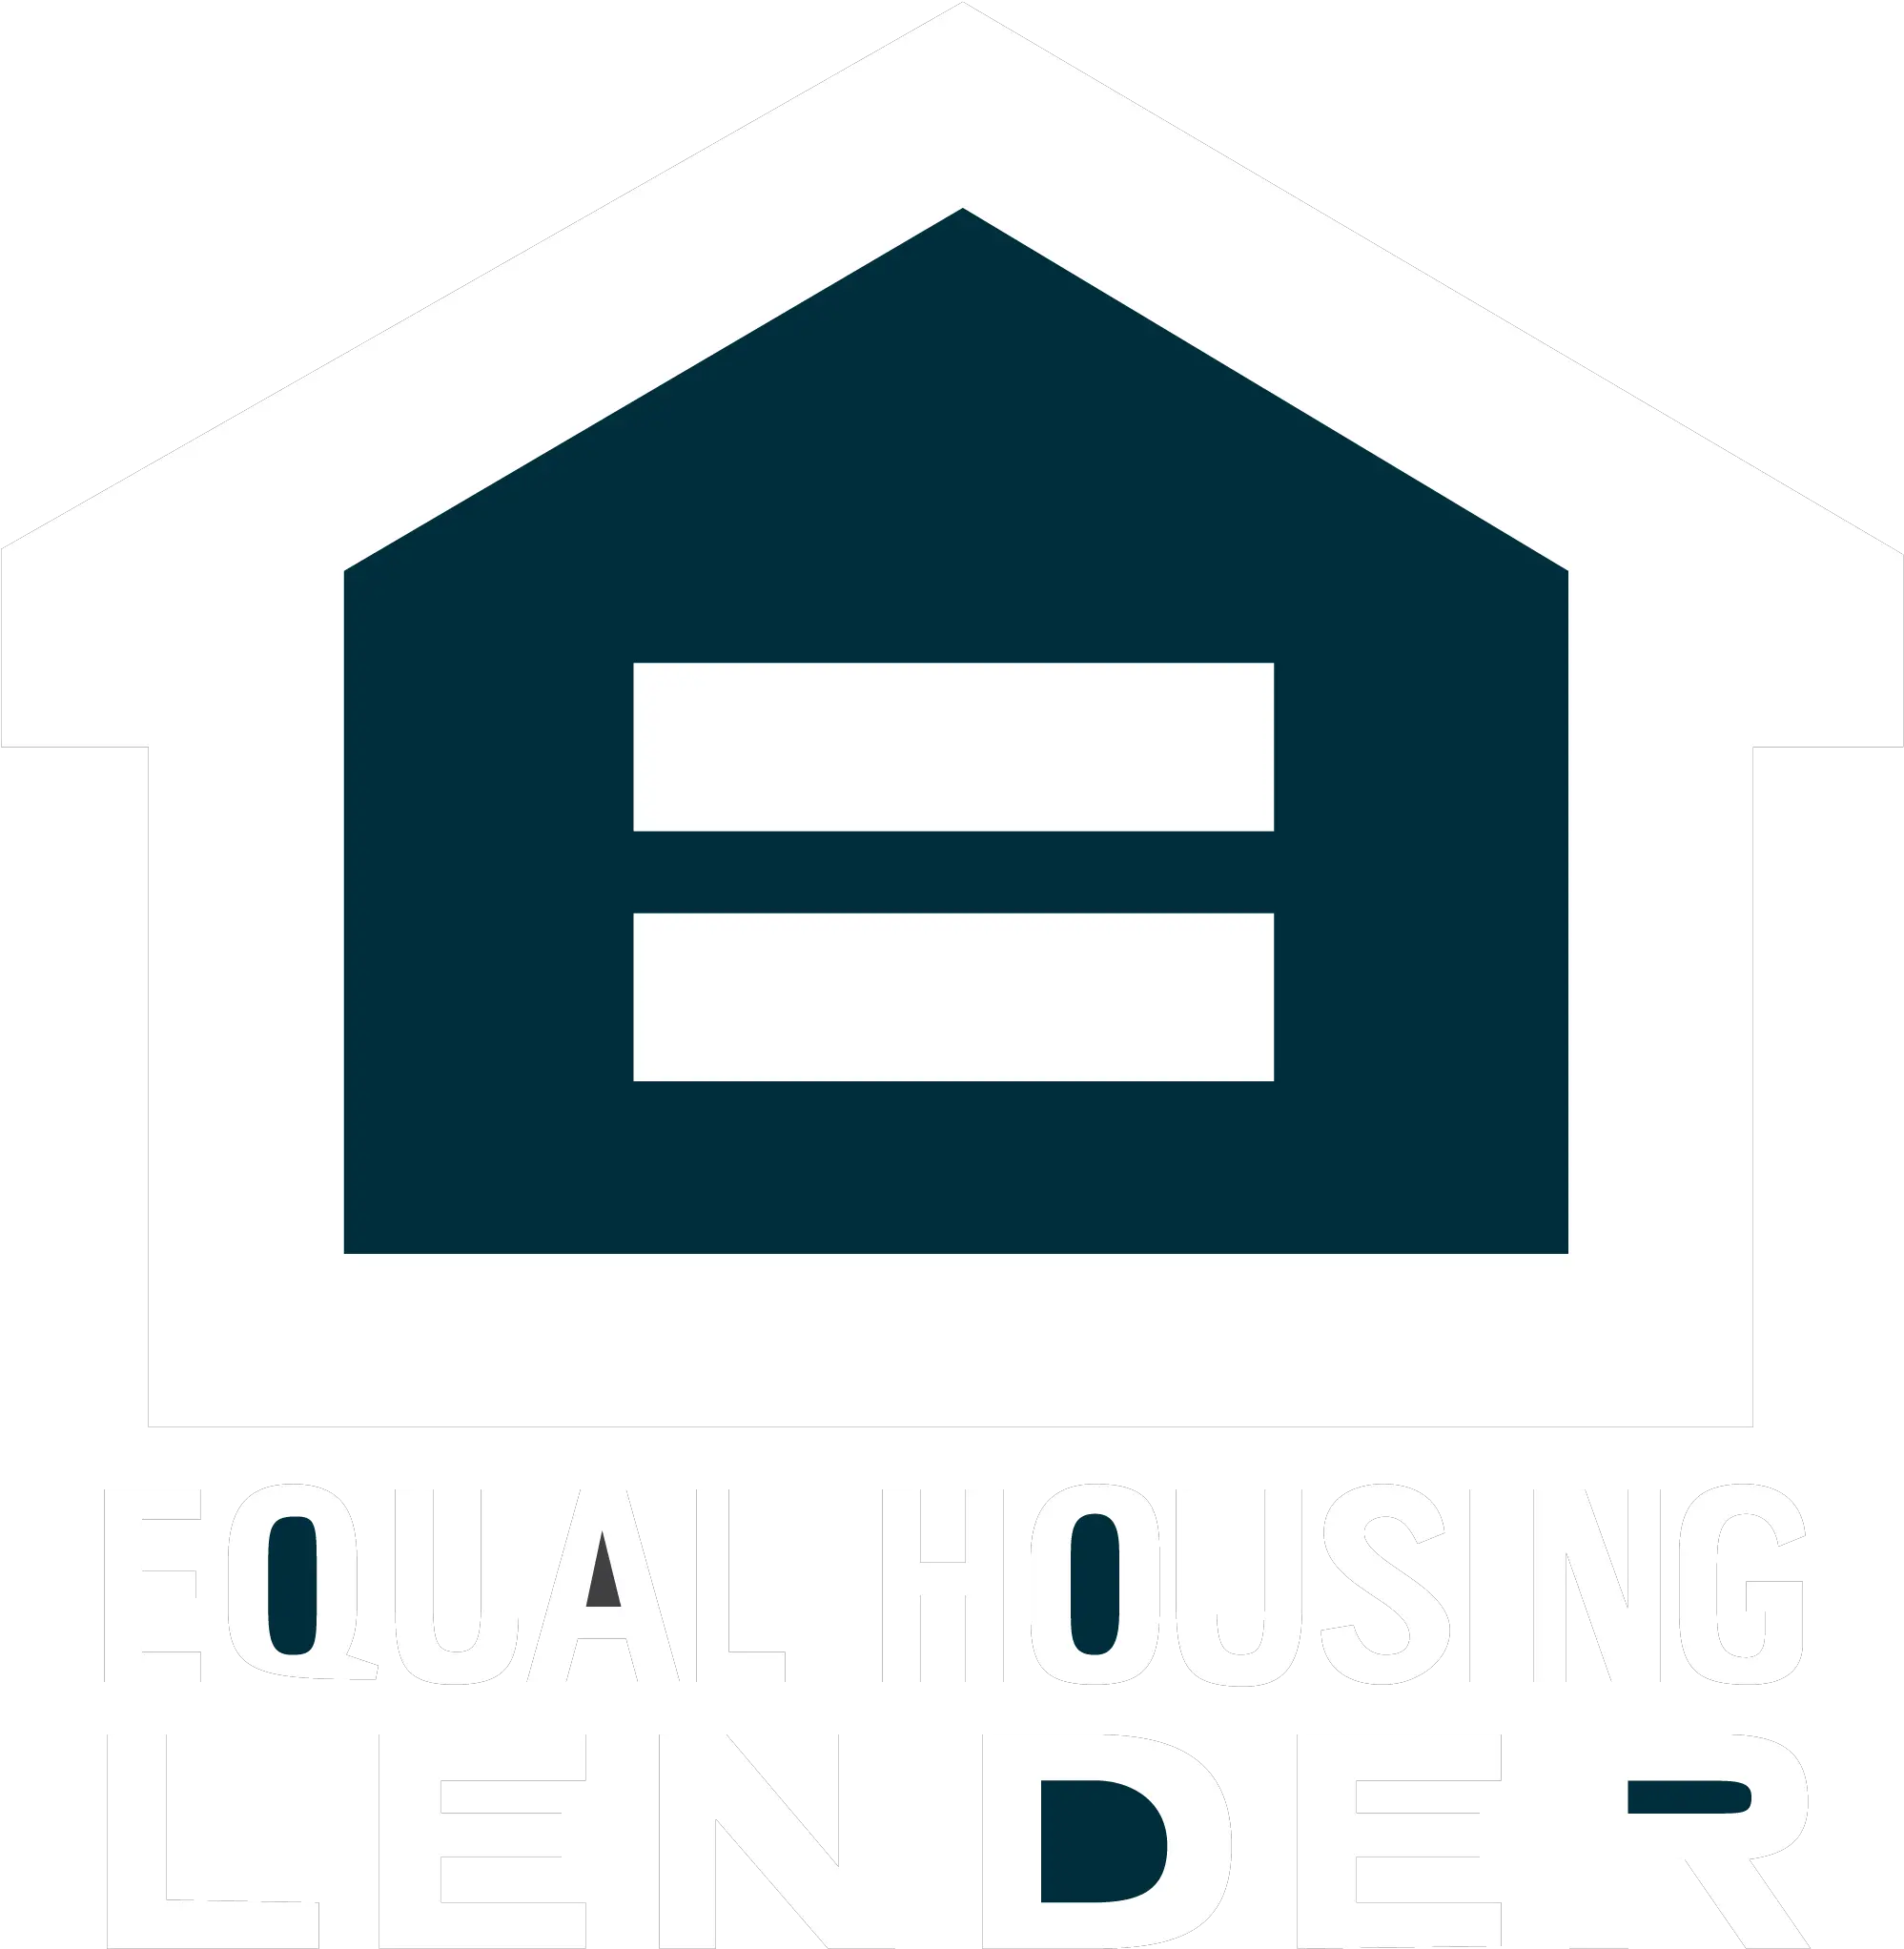 Ira Plans Traditional And Roth Iras New Dimensions Fcu Horizontal Png Equal Housing Icon